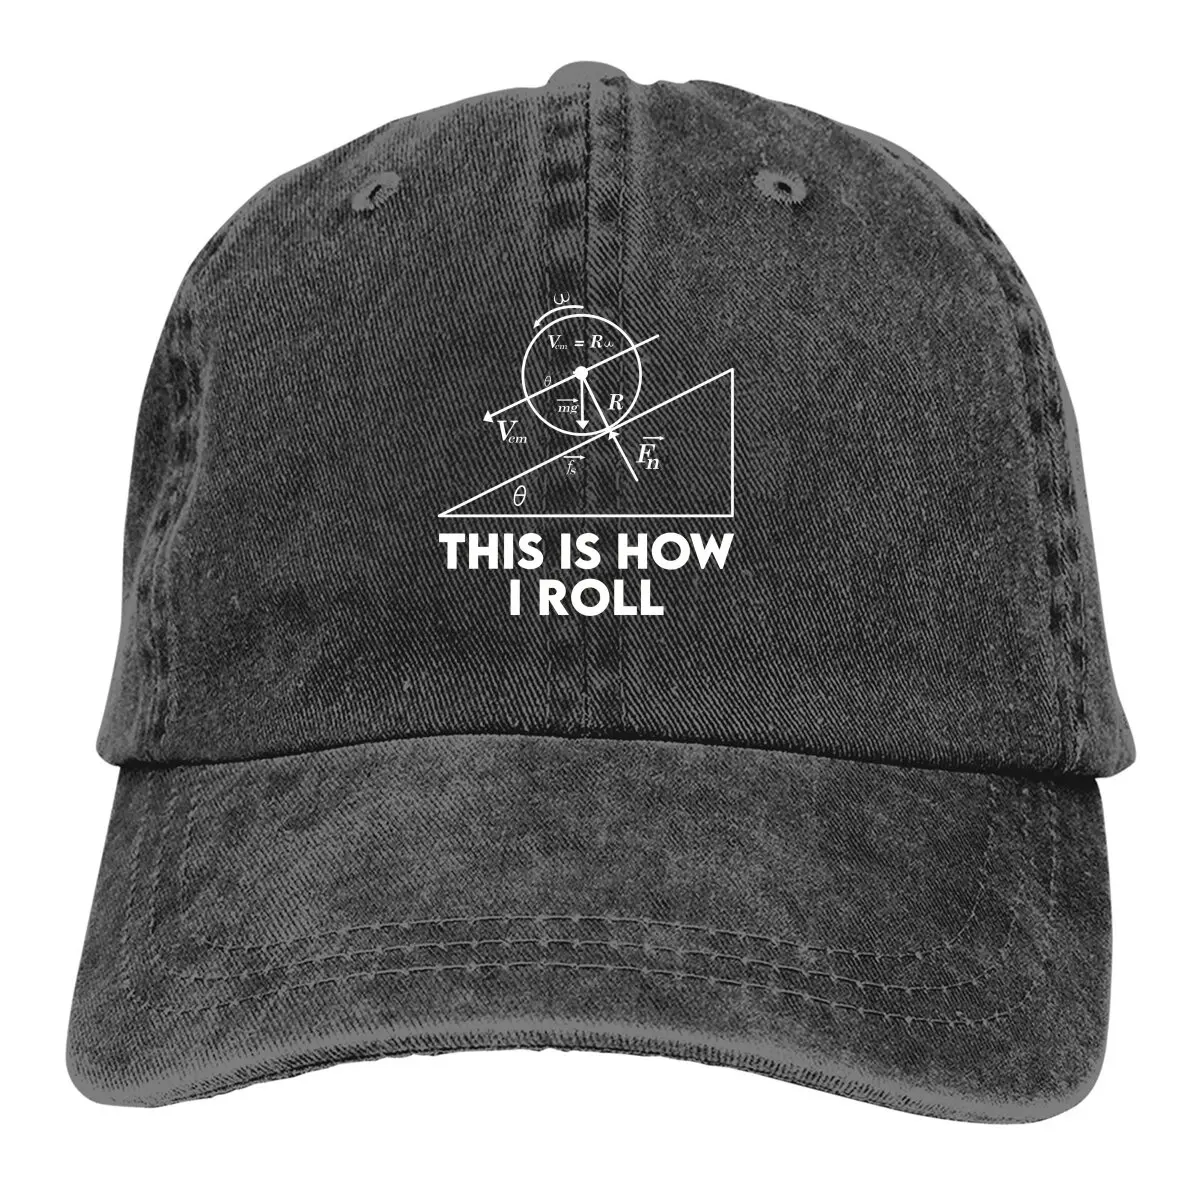 

This Is How I Roll Baseball Caps Peaked Cap Chemistry Physics Math Sun Shade Hats for Men Women